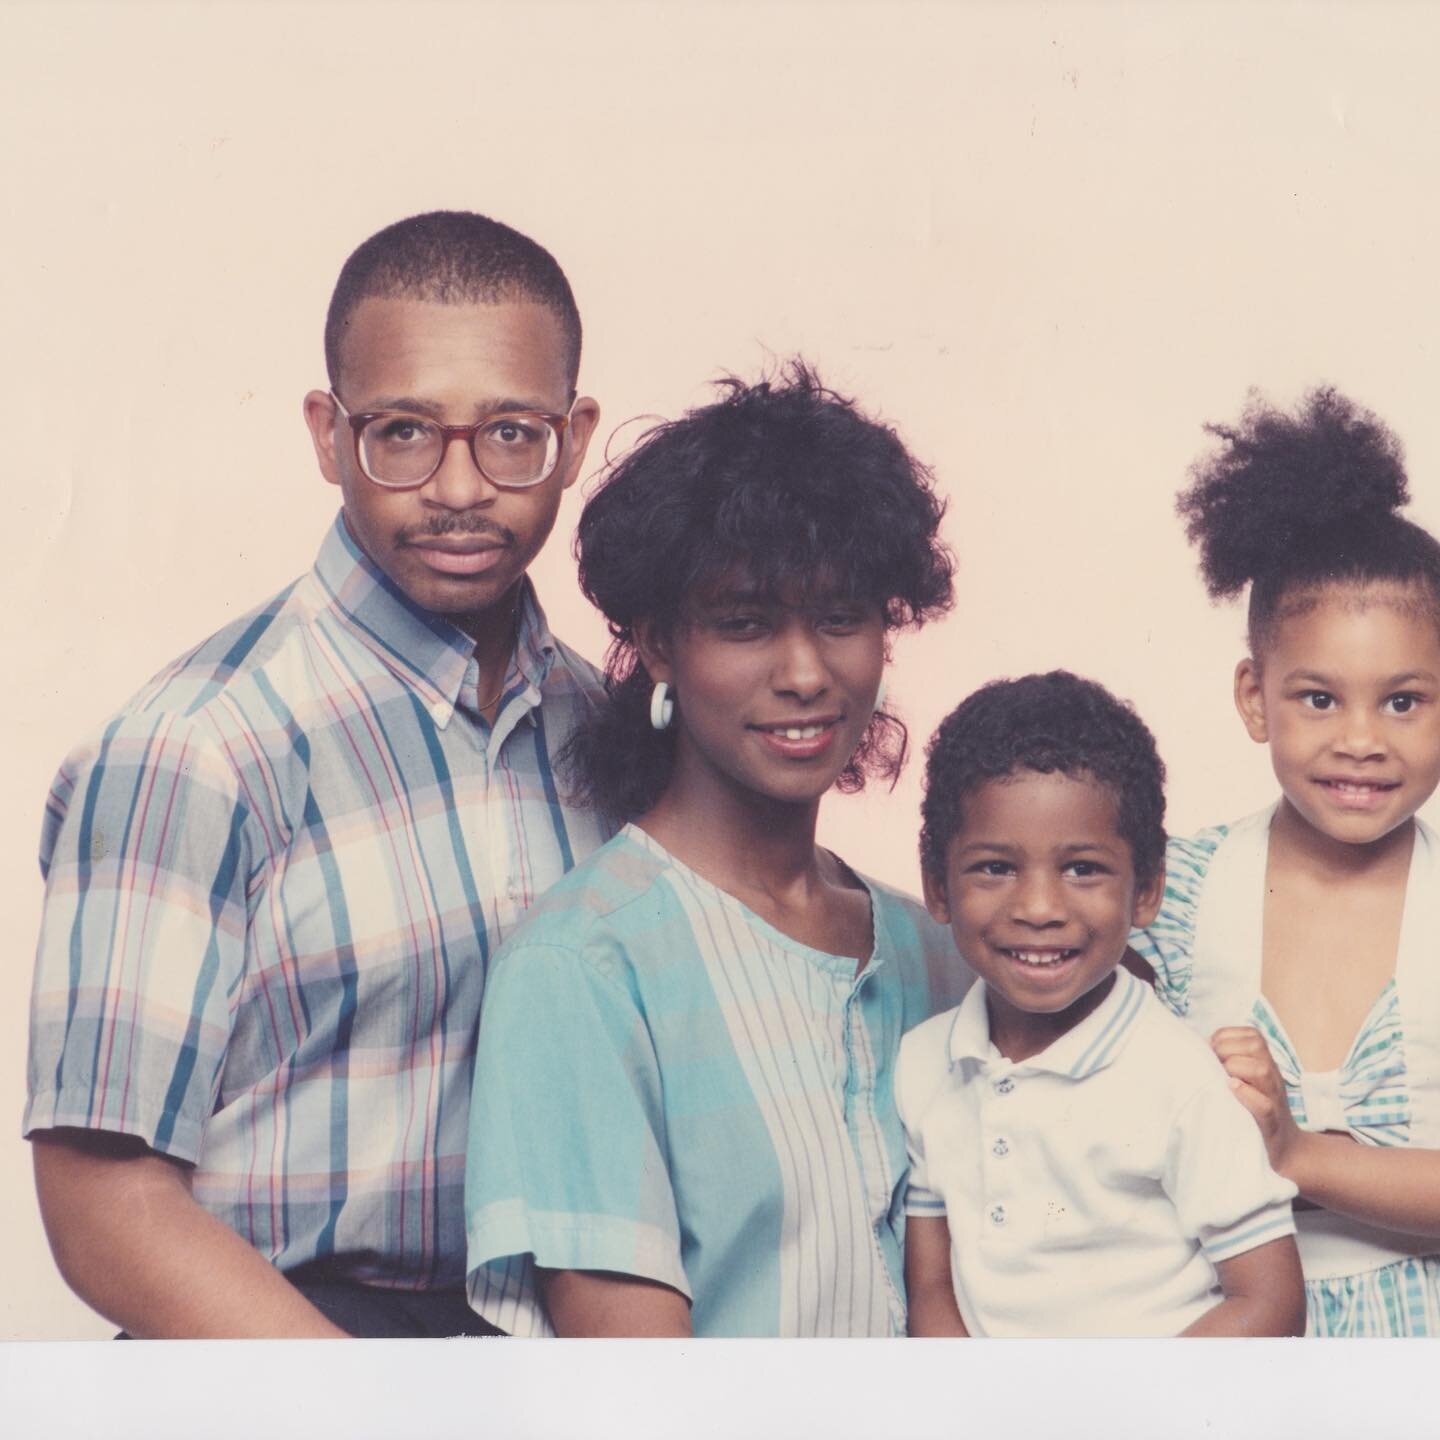 This week I celebrated both my 34th #bday (on the 15th) and #Juneteenth. 🎂
&bull;
Though I did have a #birthdayatwork ✈️ I also made some time to reflect, listen and learn more about where I came from. 📝
&bull;
This is my family. From me, my brothe